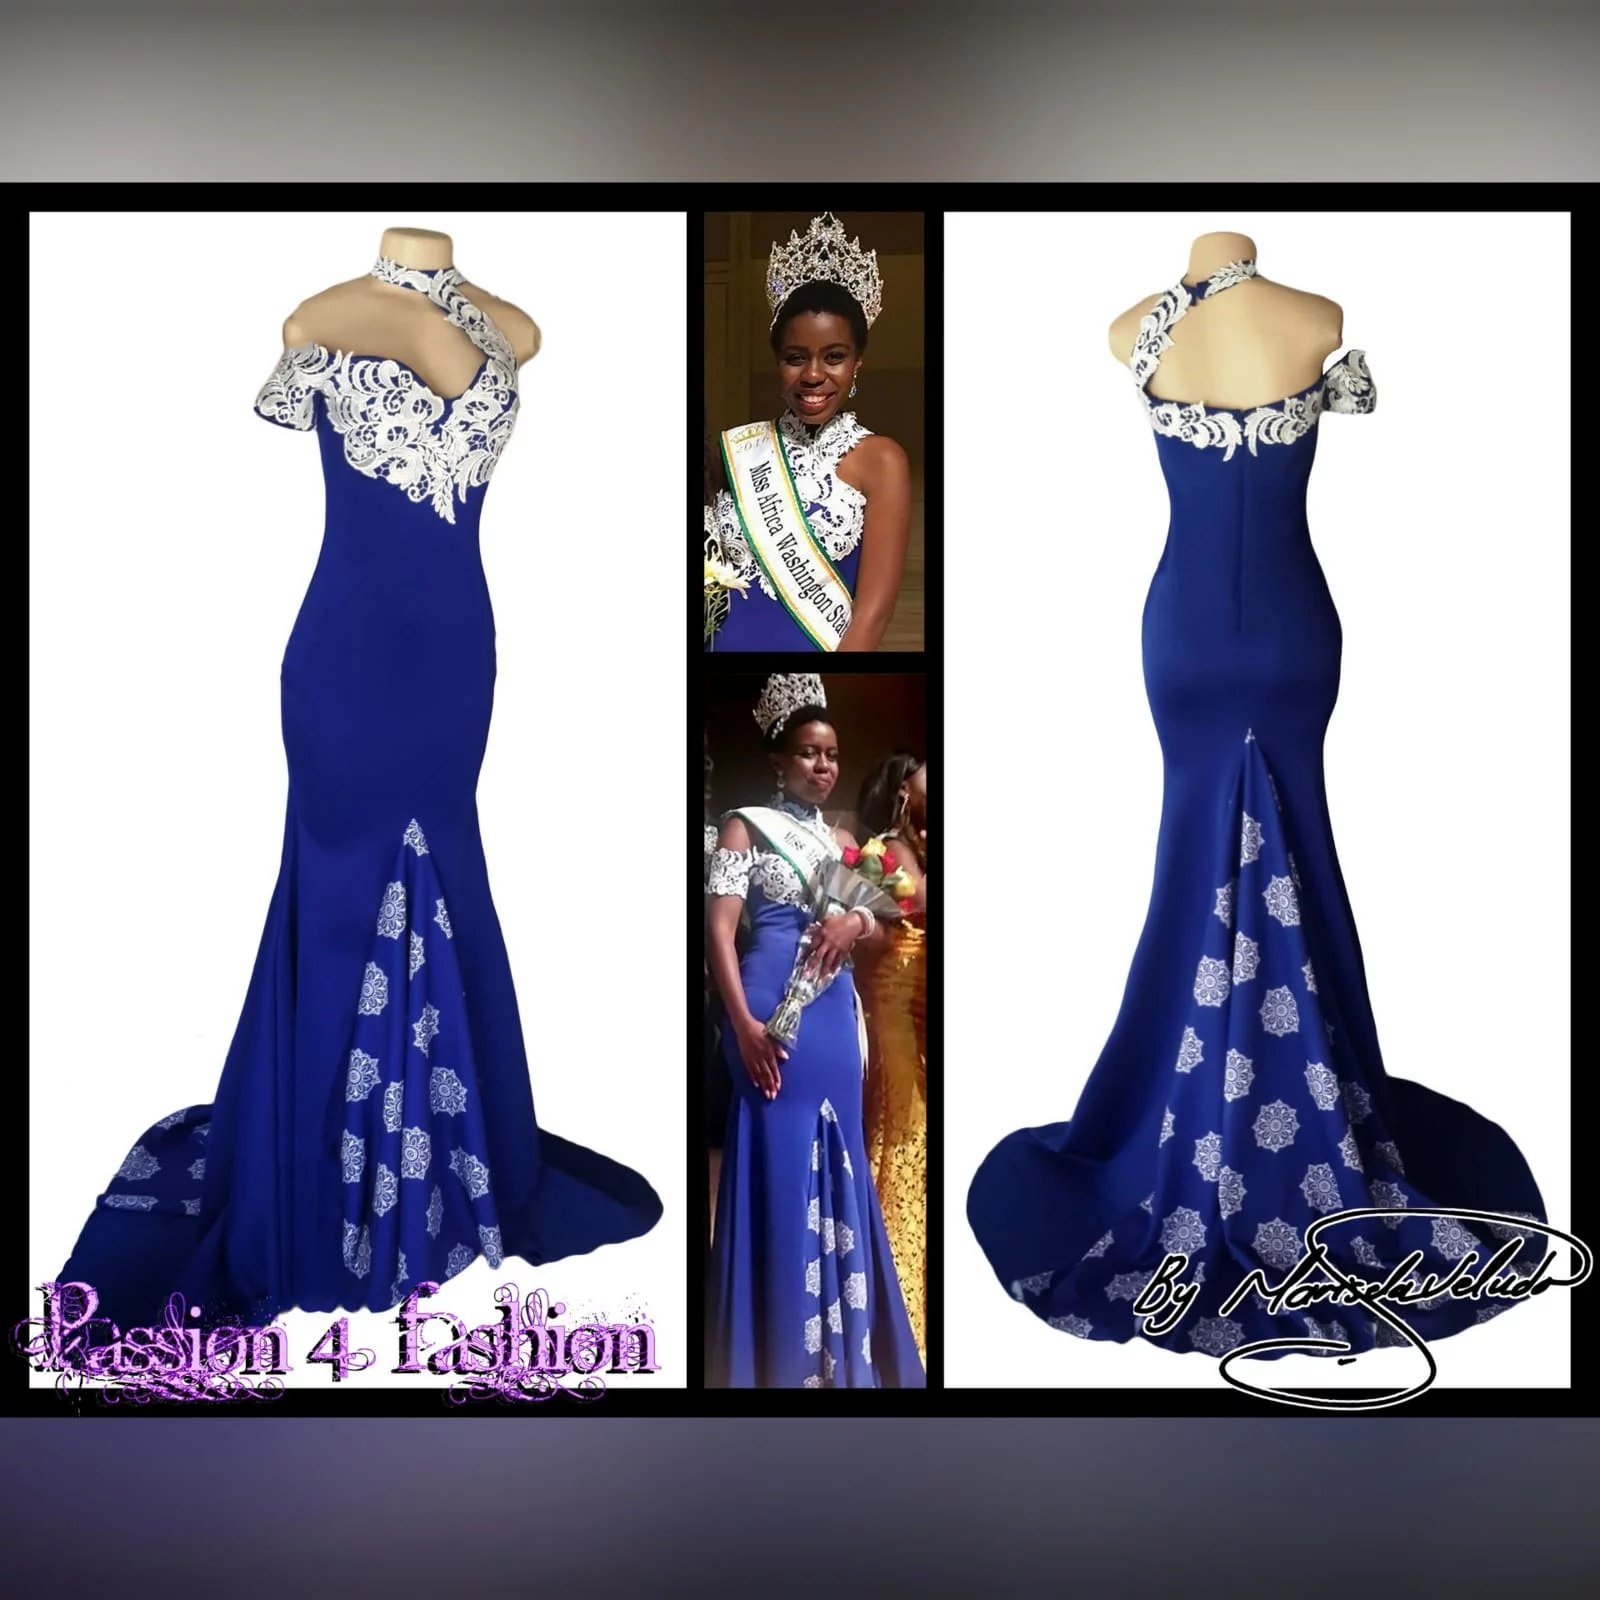 Royal blue and white pageant dress 4 royal blue and white soft mermaid pageant evening dress, with a choker neckline, with one off shoulder short sleeve. Dress has a front and back panel with a print. Dress has a train